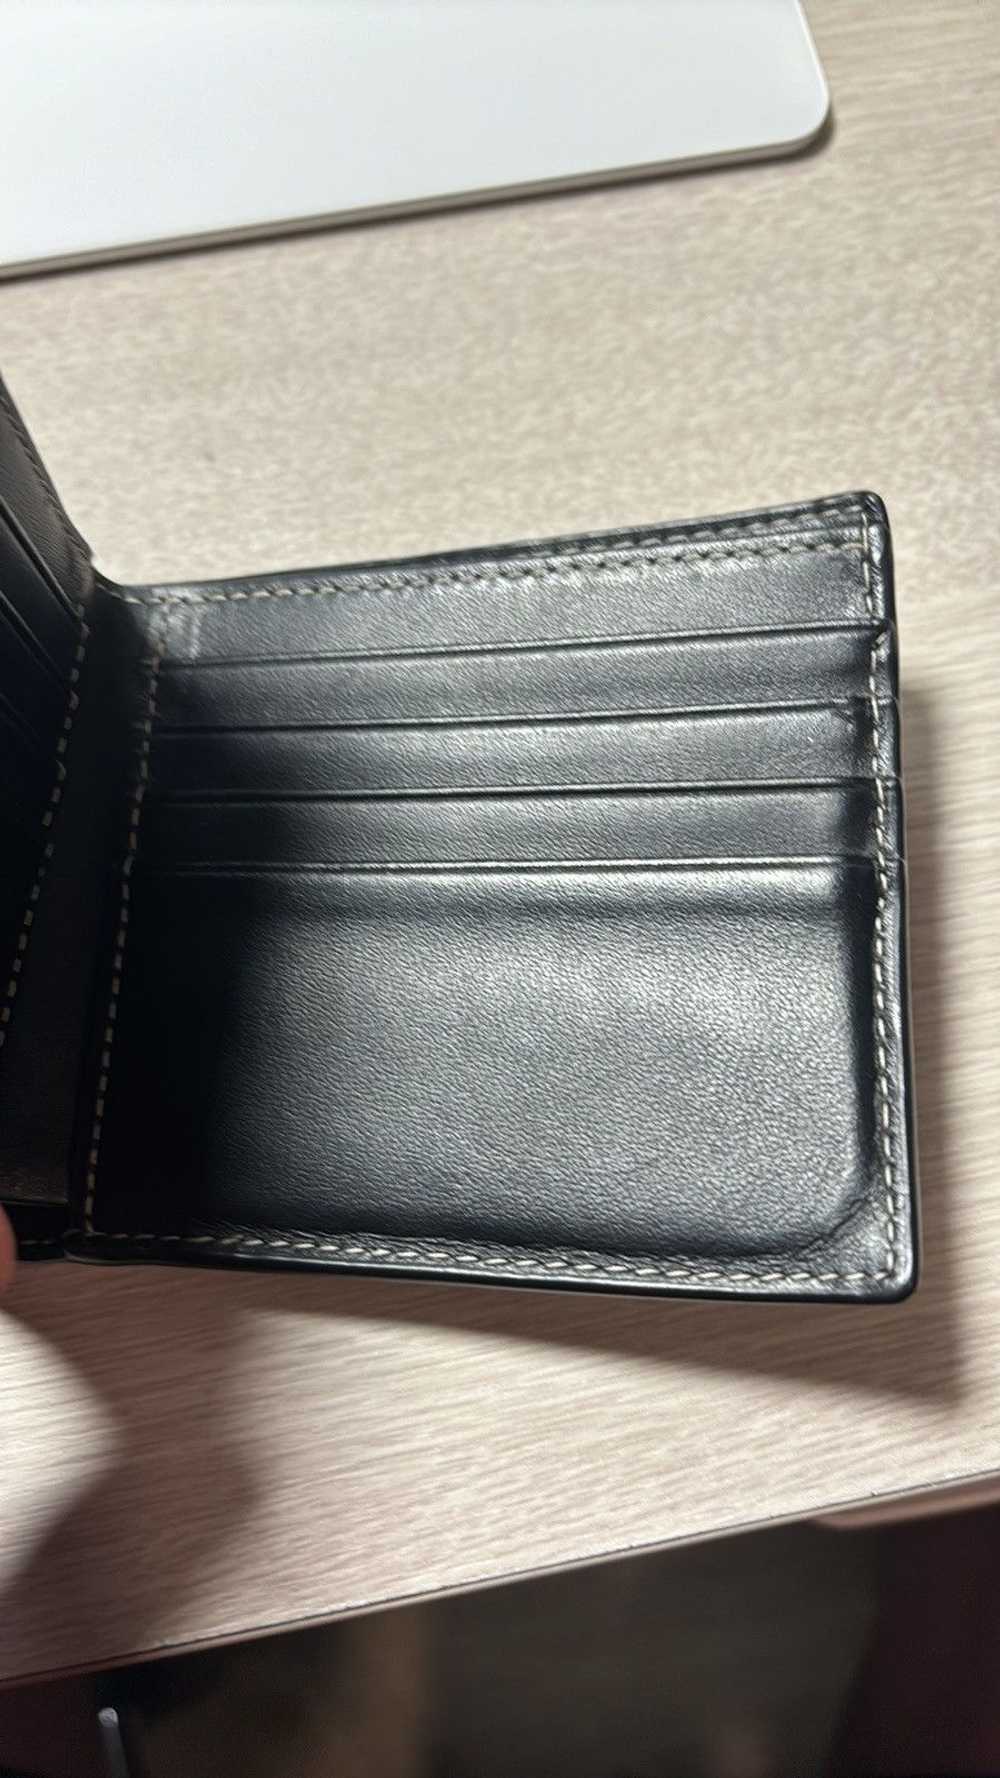 Burberry Check Leather Wallet - image 3